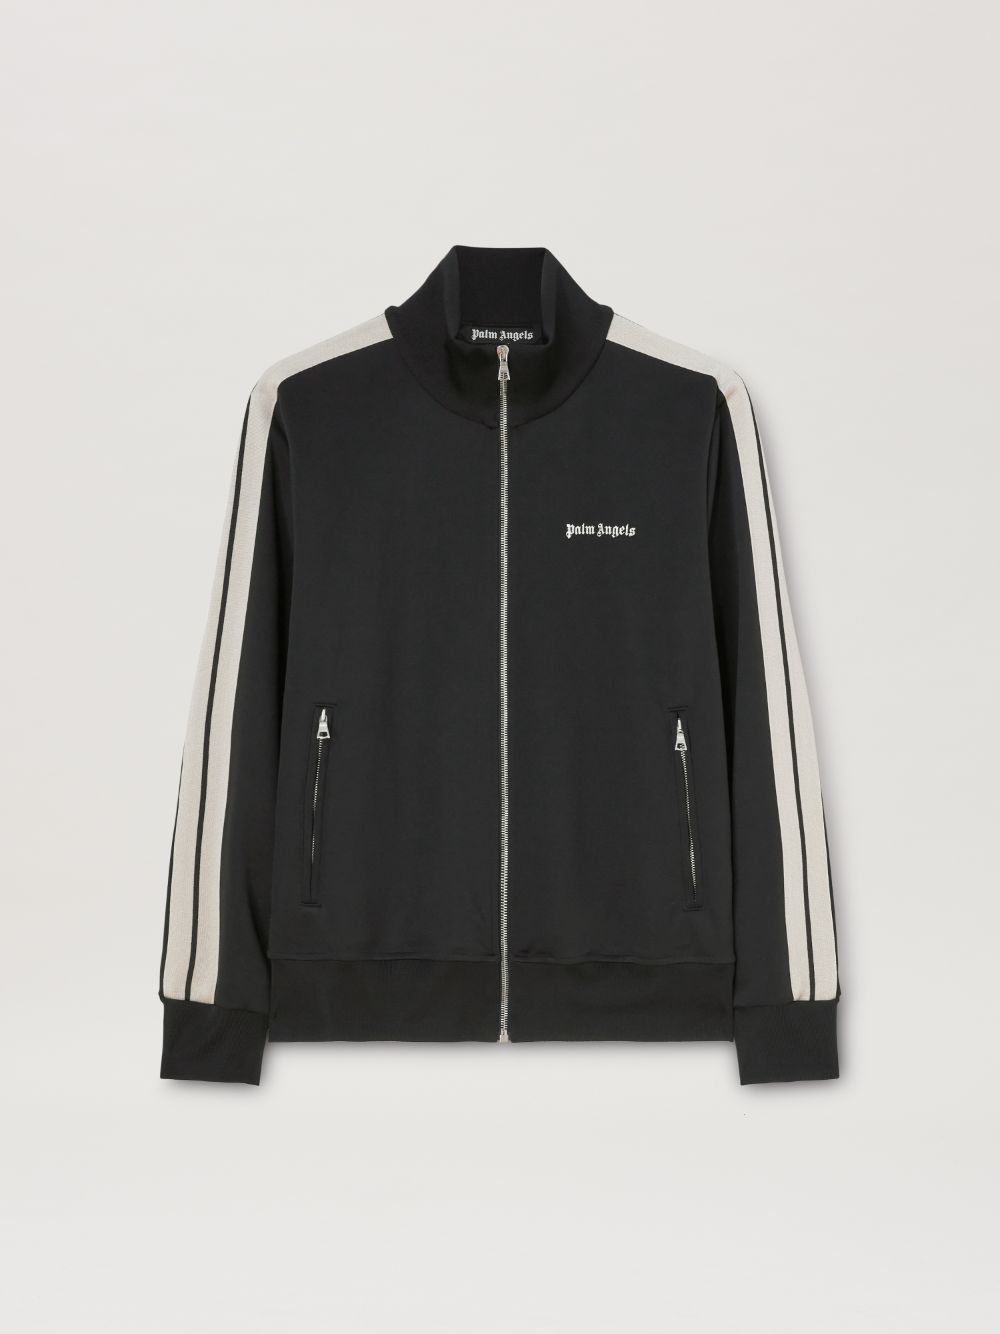 New Classic Track Jacket in black - Palm Angels® Official